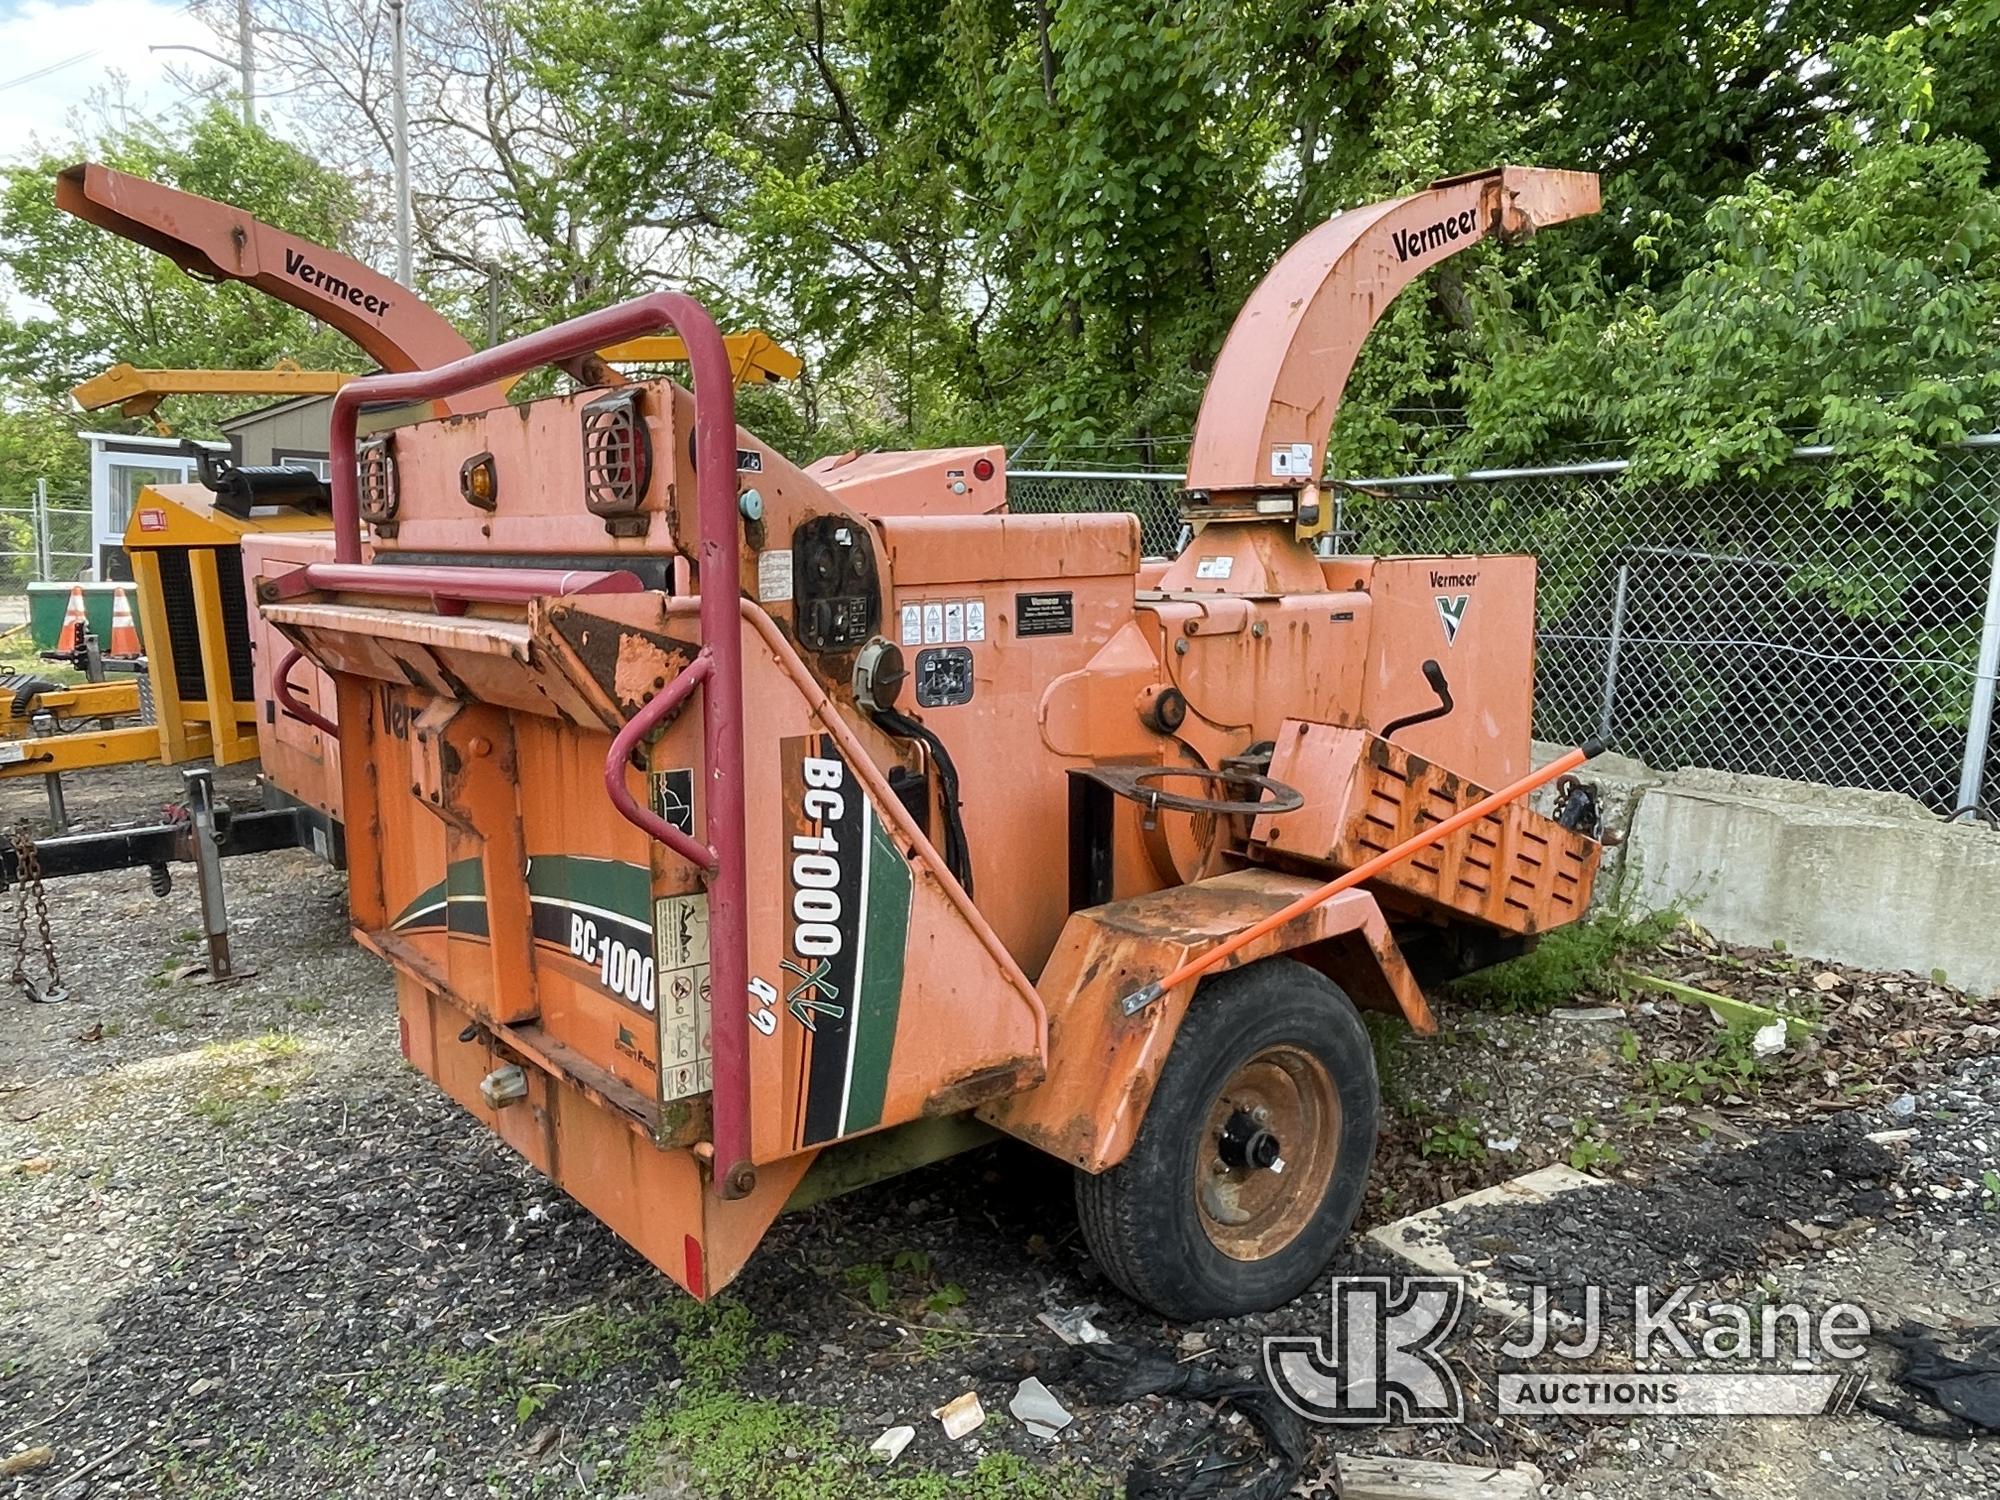 (Plymouth Meeting, PA) 2013 Vermeer BC1000XL Chipper (12in Drum) Bad Engine Not Running Condition Un